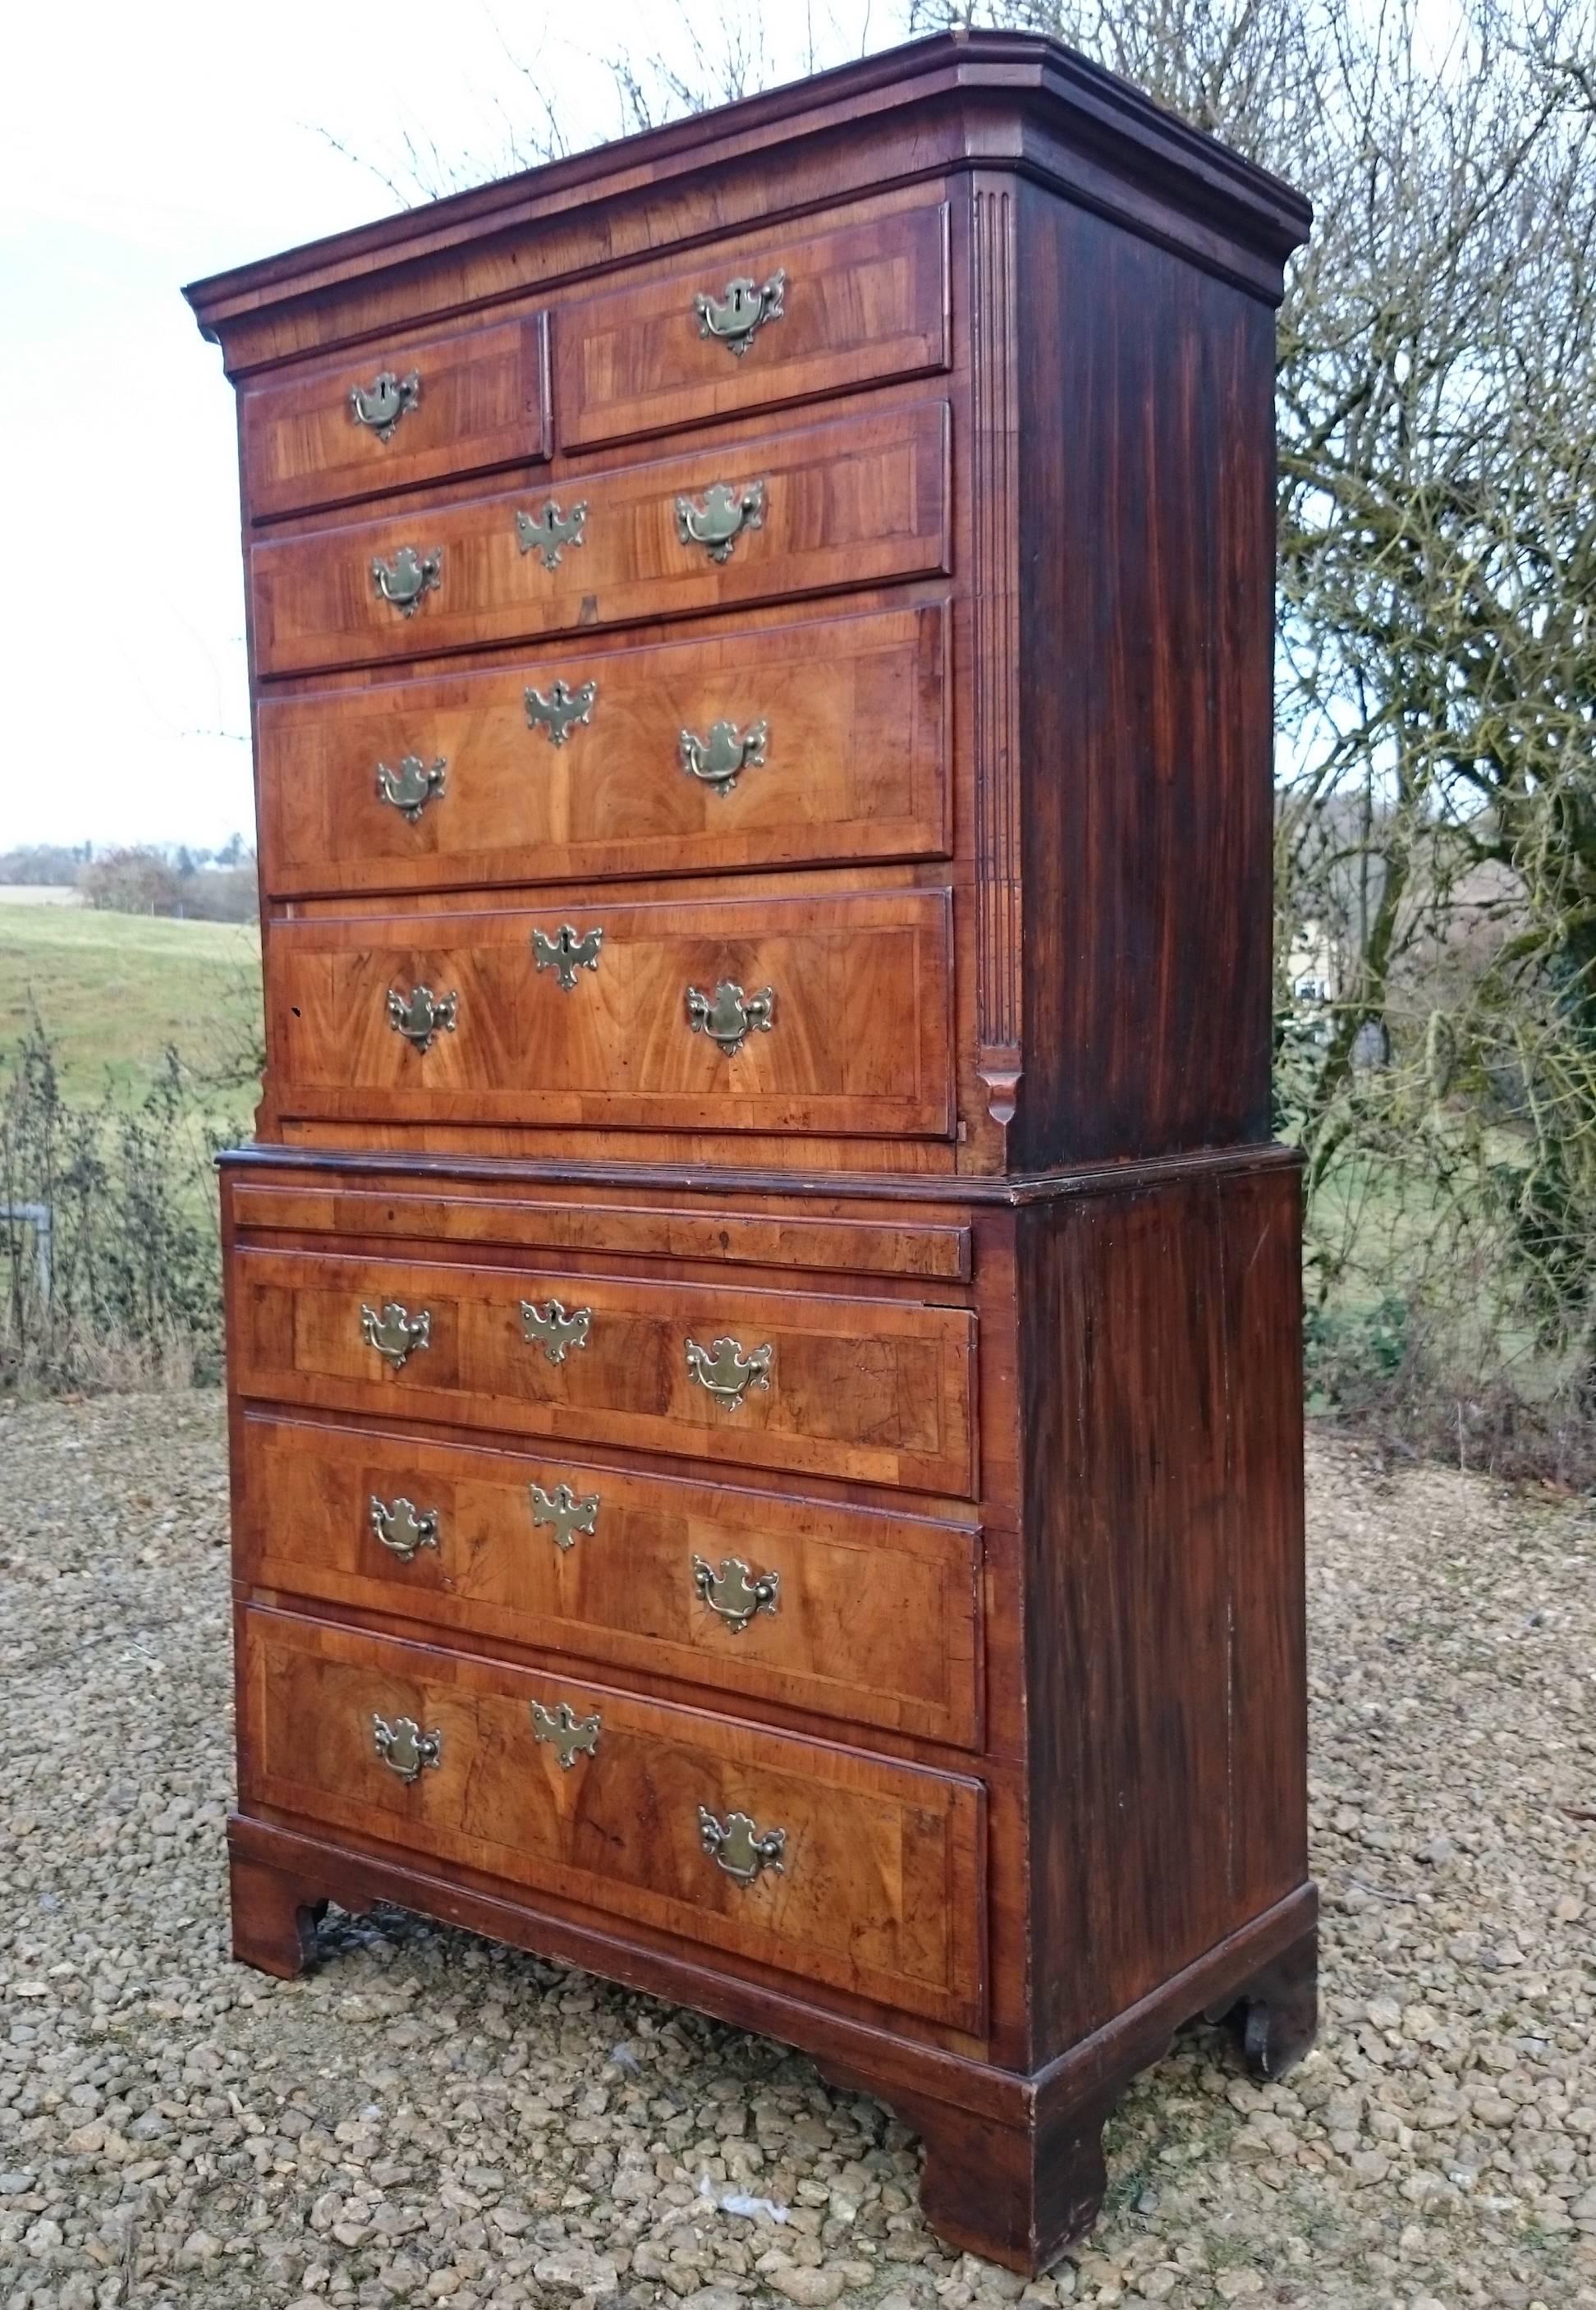 Early 18th century walnut chest on chest. This one is very good value and still has all the good stuff like graduated drawers, brushing slide, string banding and bookmatched veneers. It has the early pre-cockbeading drawer mouldings and proper oak